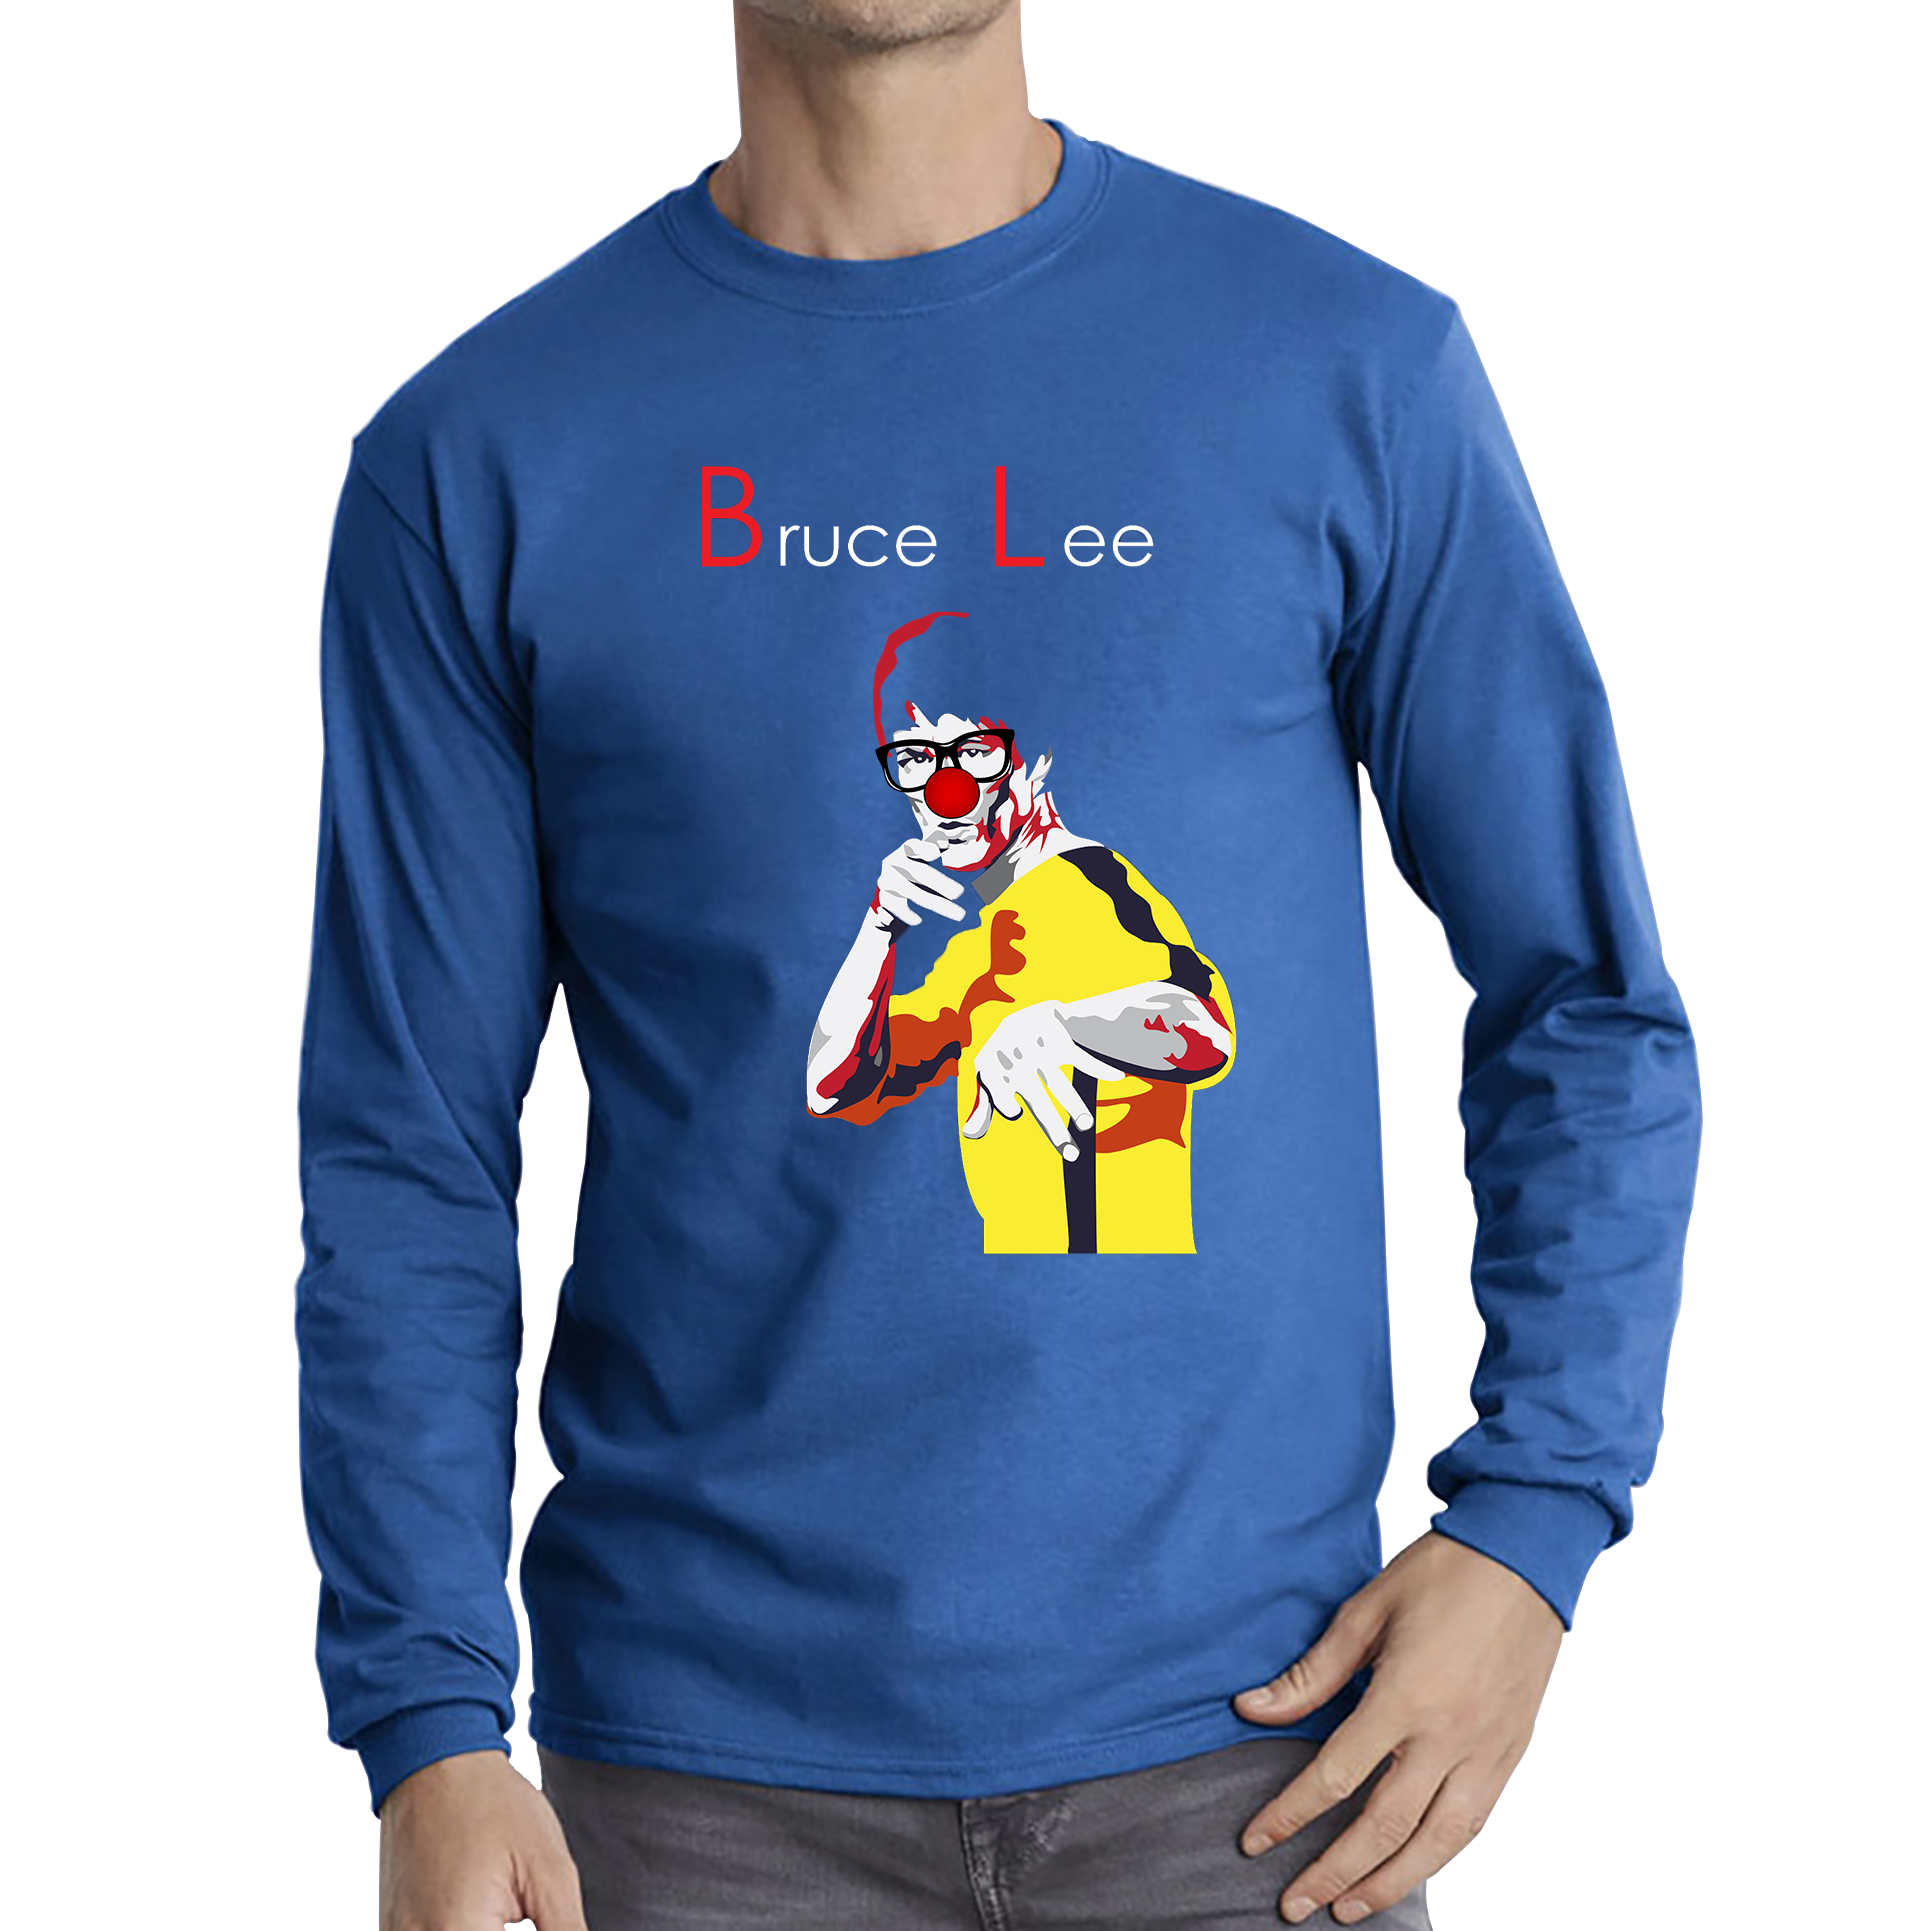 Bruce Lee Red Nose Day Adult Long Sleeve T Shirt. 50% Goes To Charity